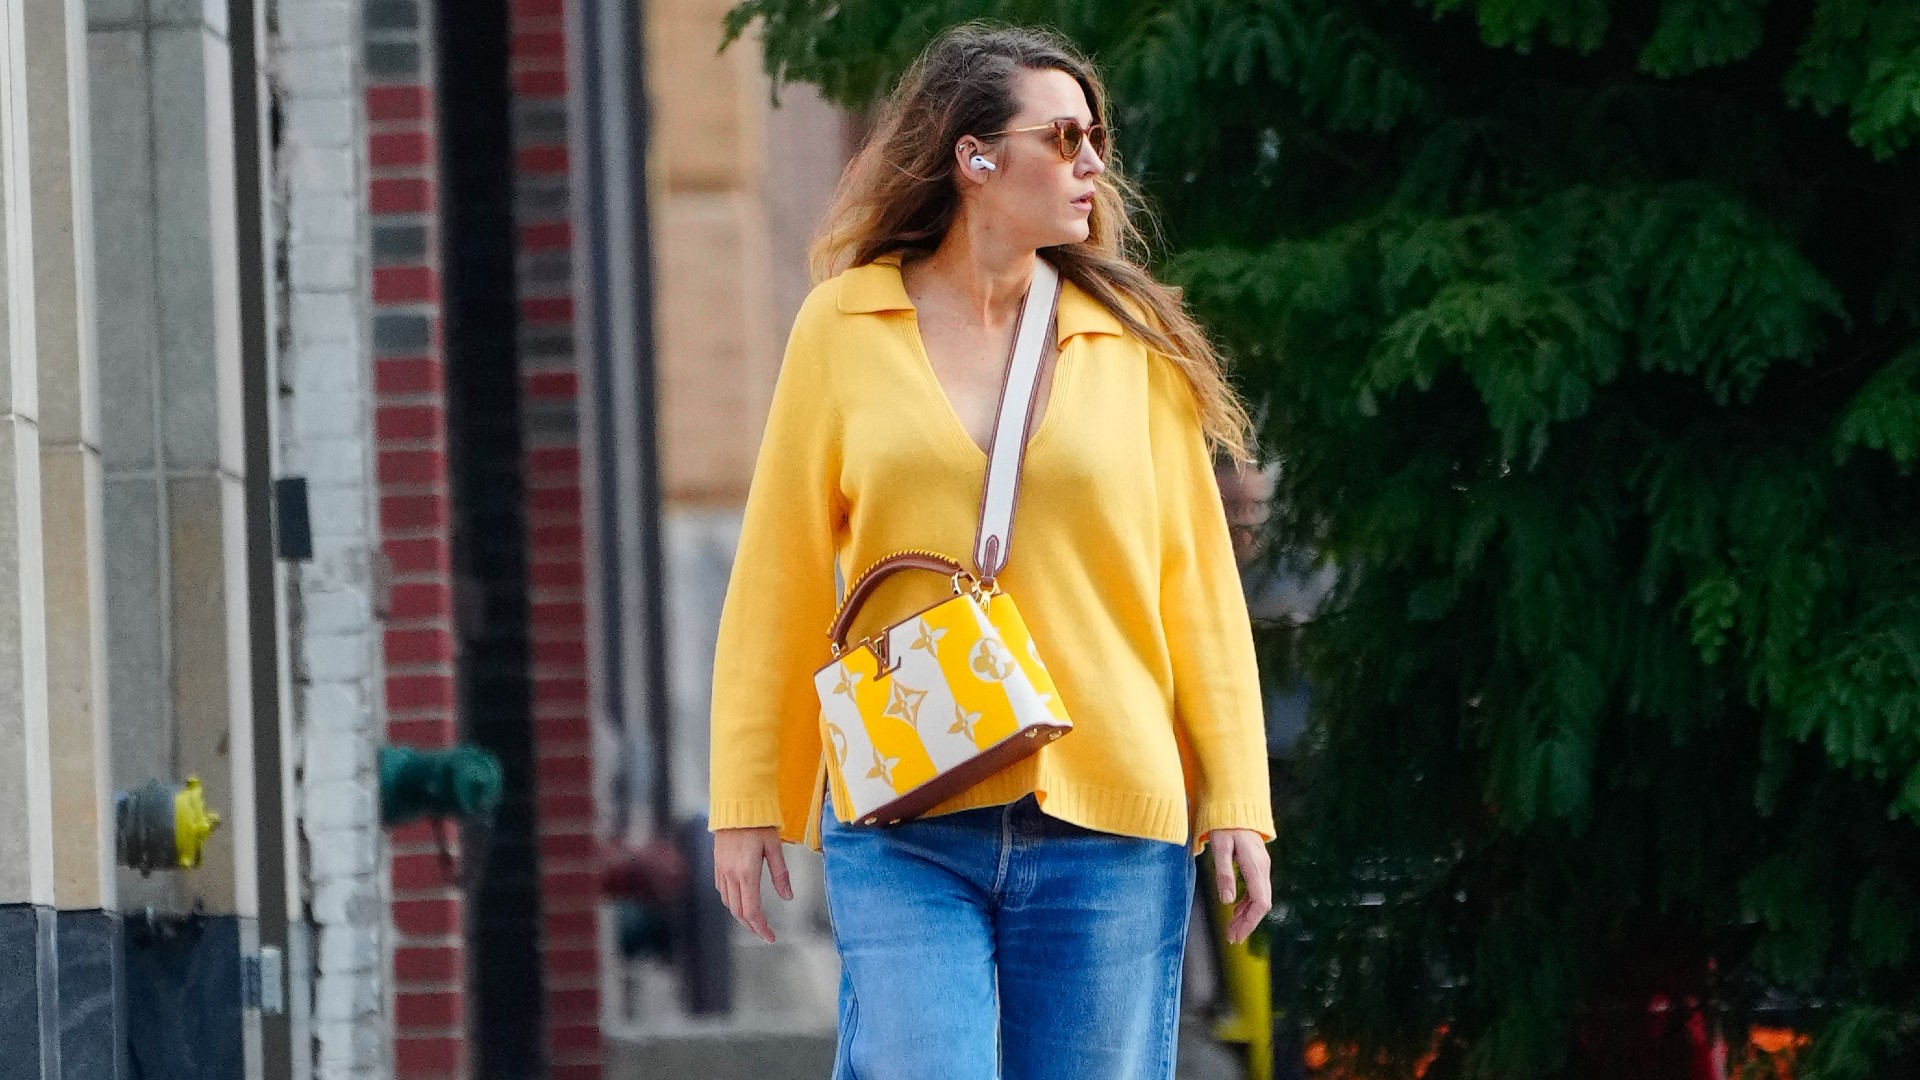 Blake Lively's Phone Crossbody Is a Travel Must